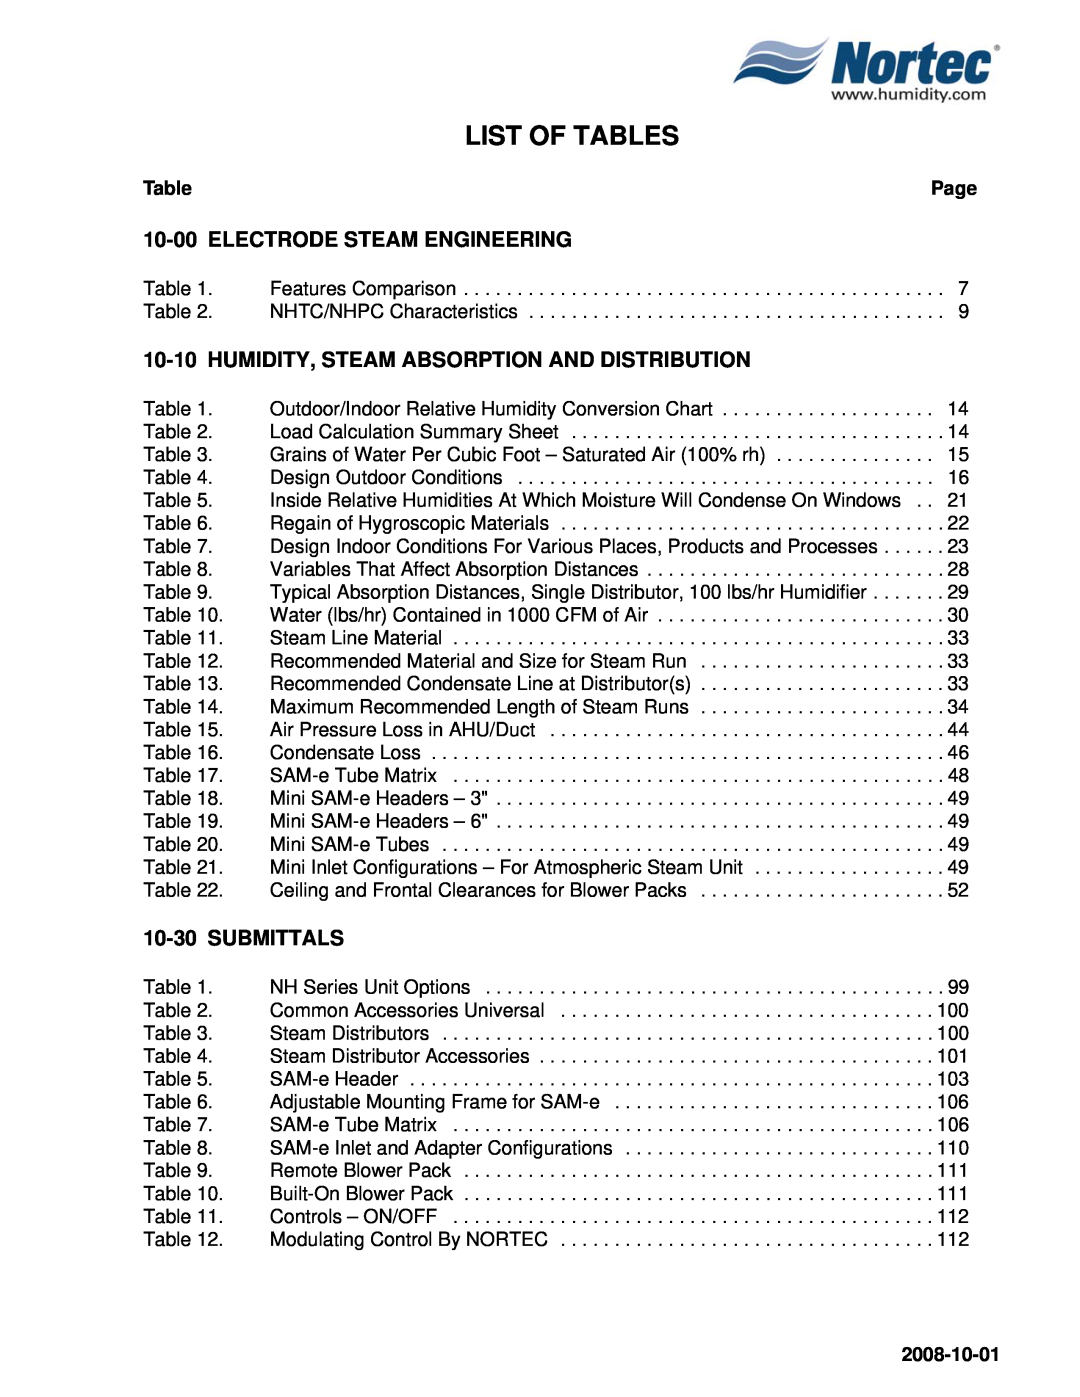 Nortec NHTC, NHPC List Of Tables, 10-00ELECTRODE STEAM ENGINEERING, 10-10HUMIDITY, STEAM ABSORPTION AND DISTRIBUTION, Page 